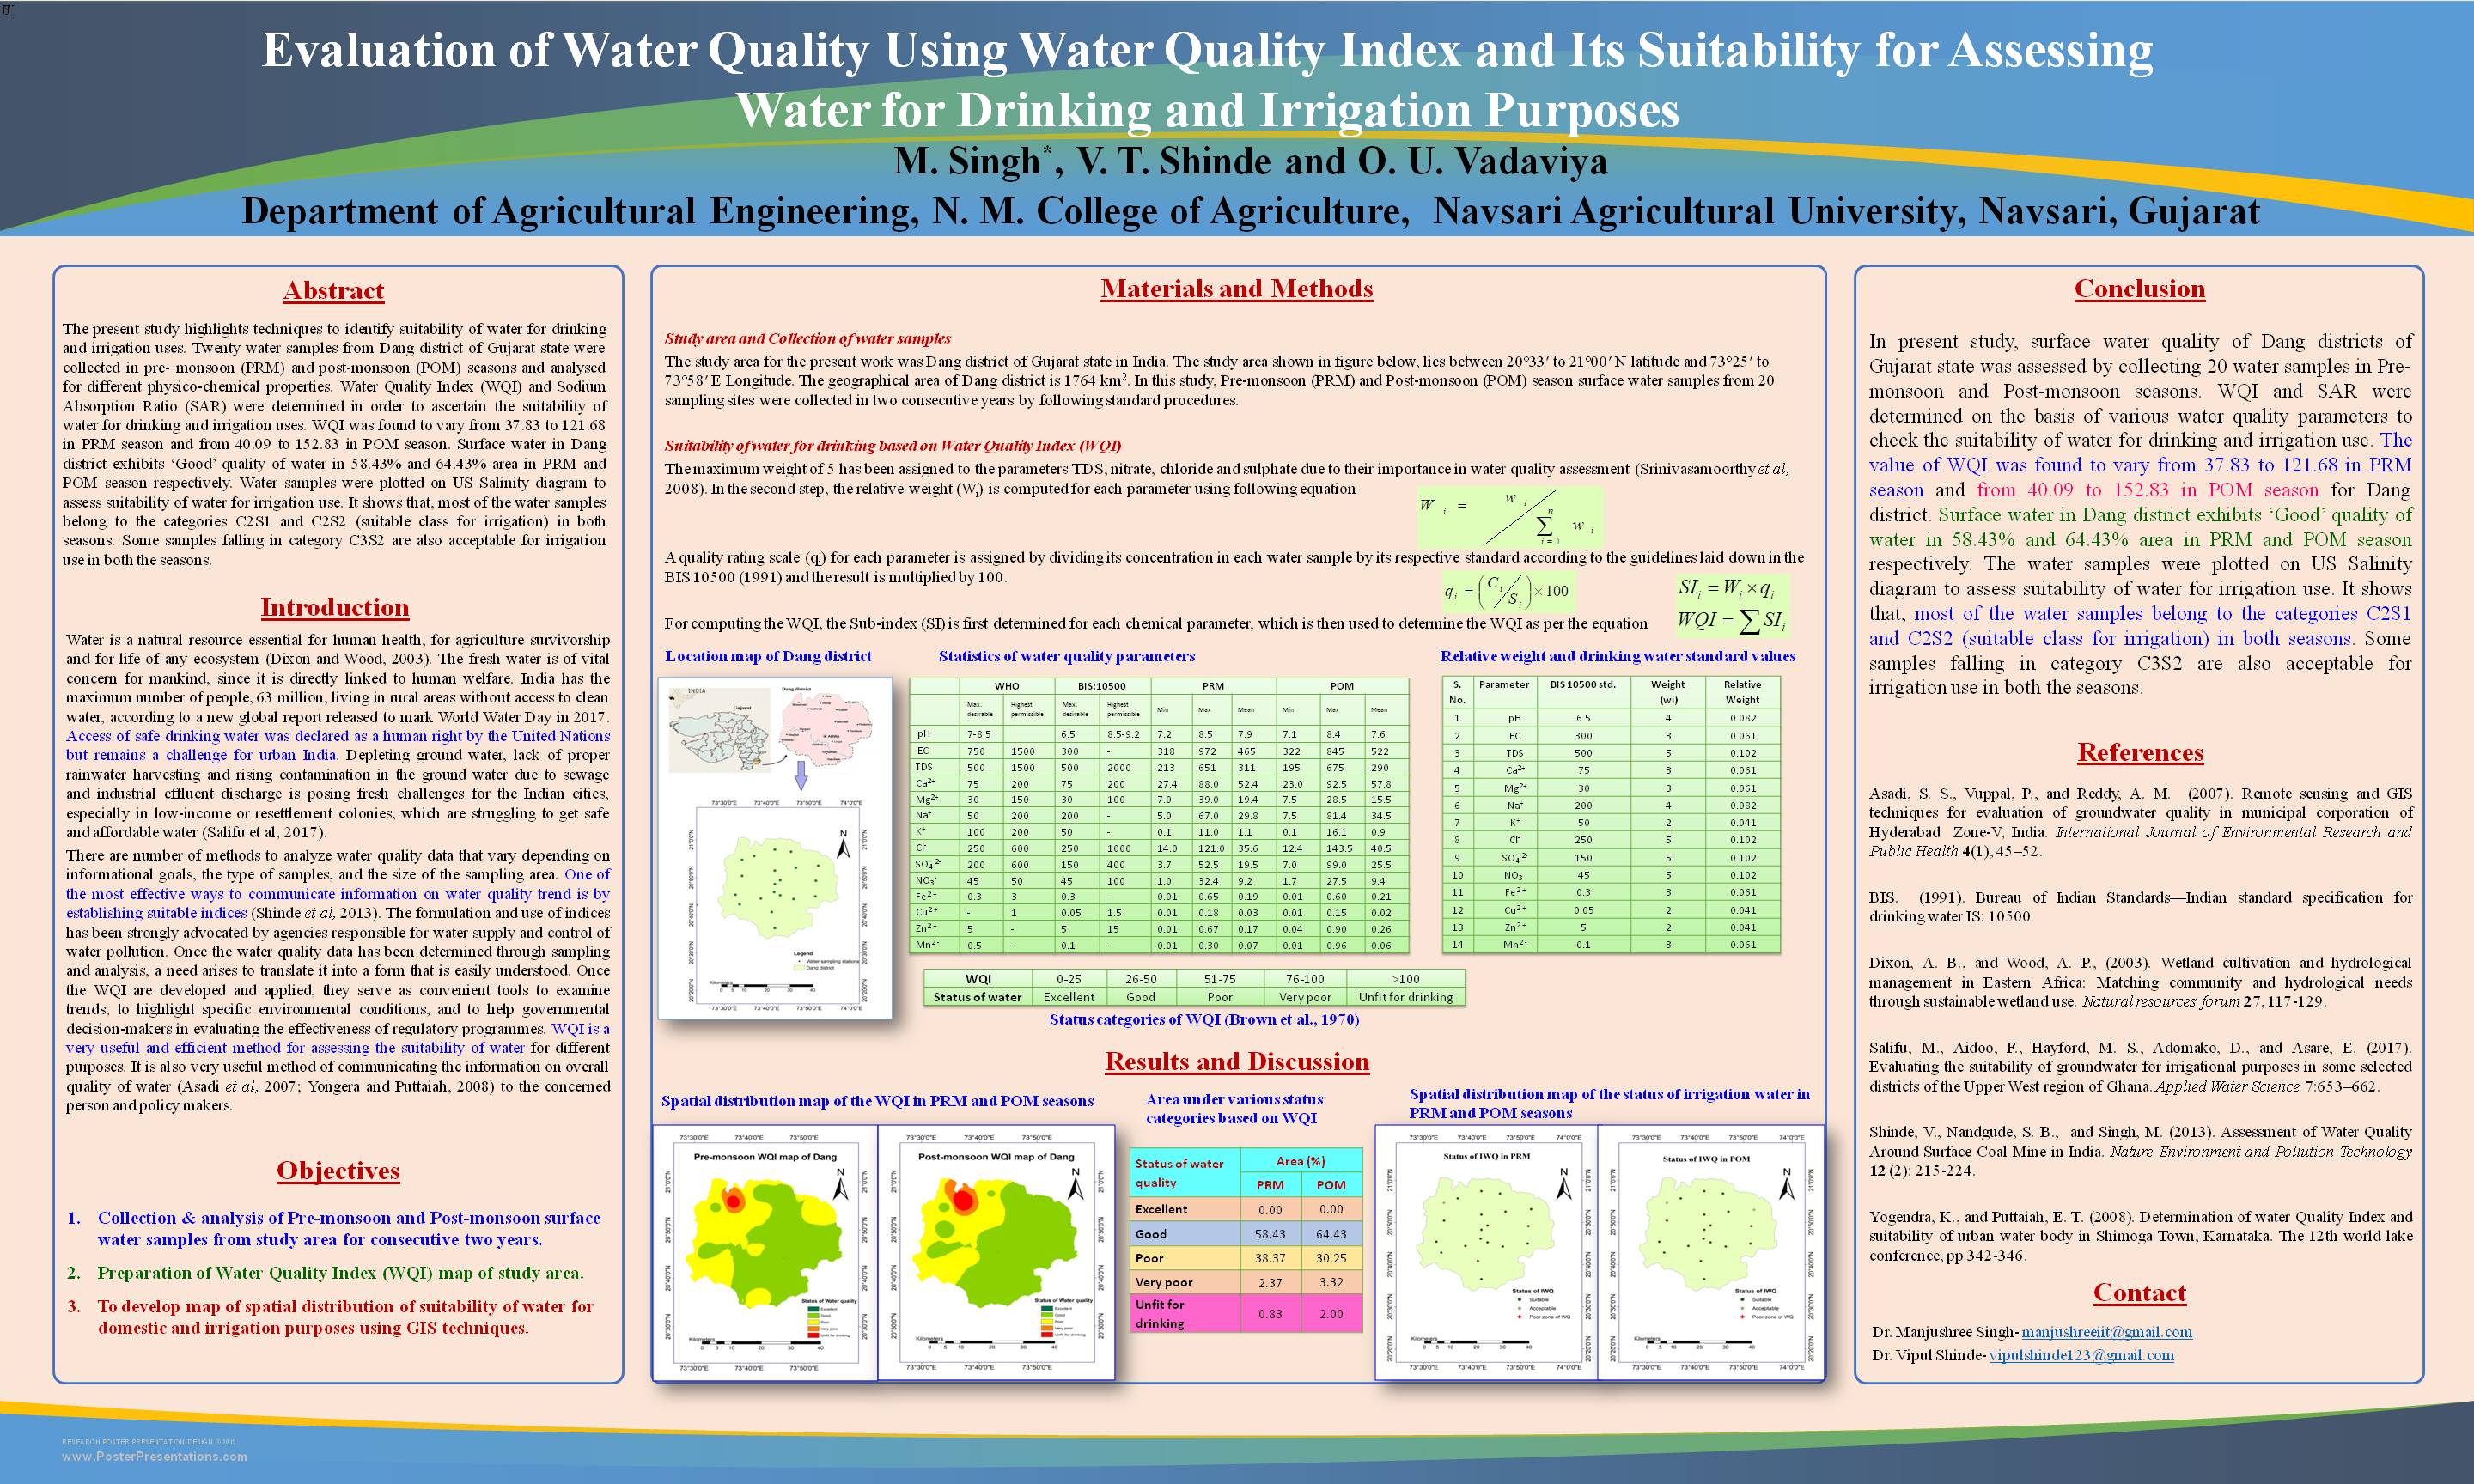 Evaluation of Water Quality Using Water Quality Index and Its Suitability for Assessing Water for Drinking and Irrigation Purposes